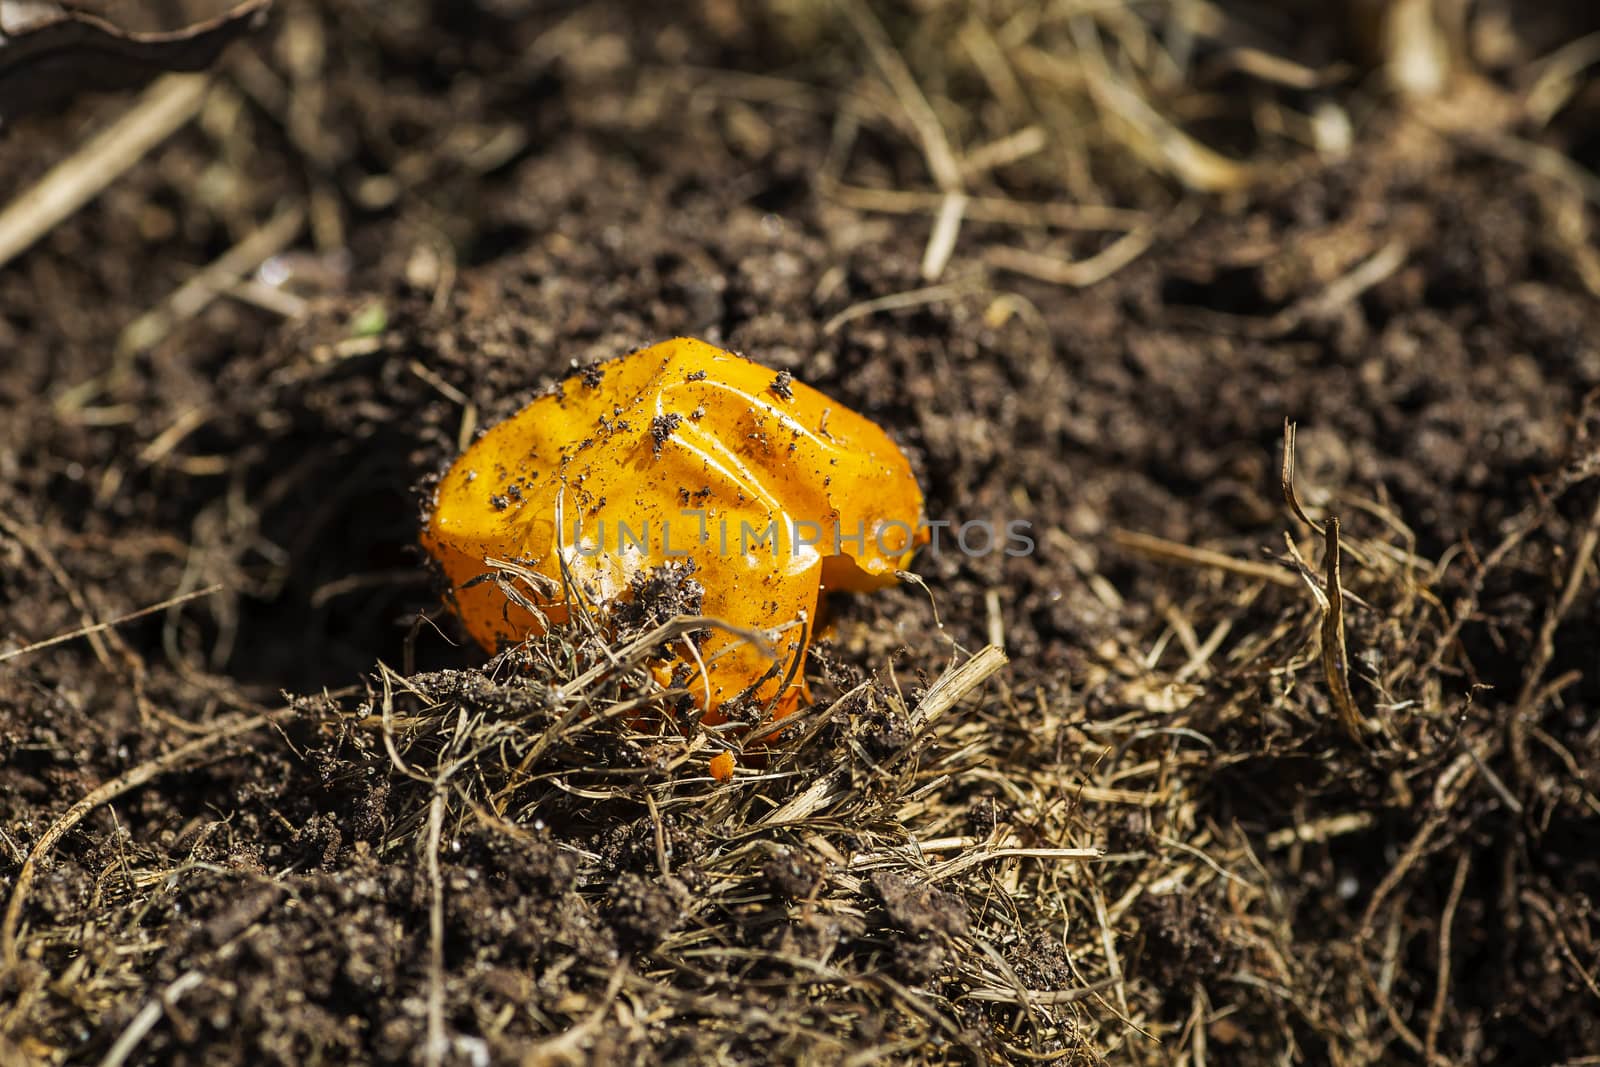 small dry tomato skin laying on the ground